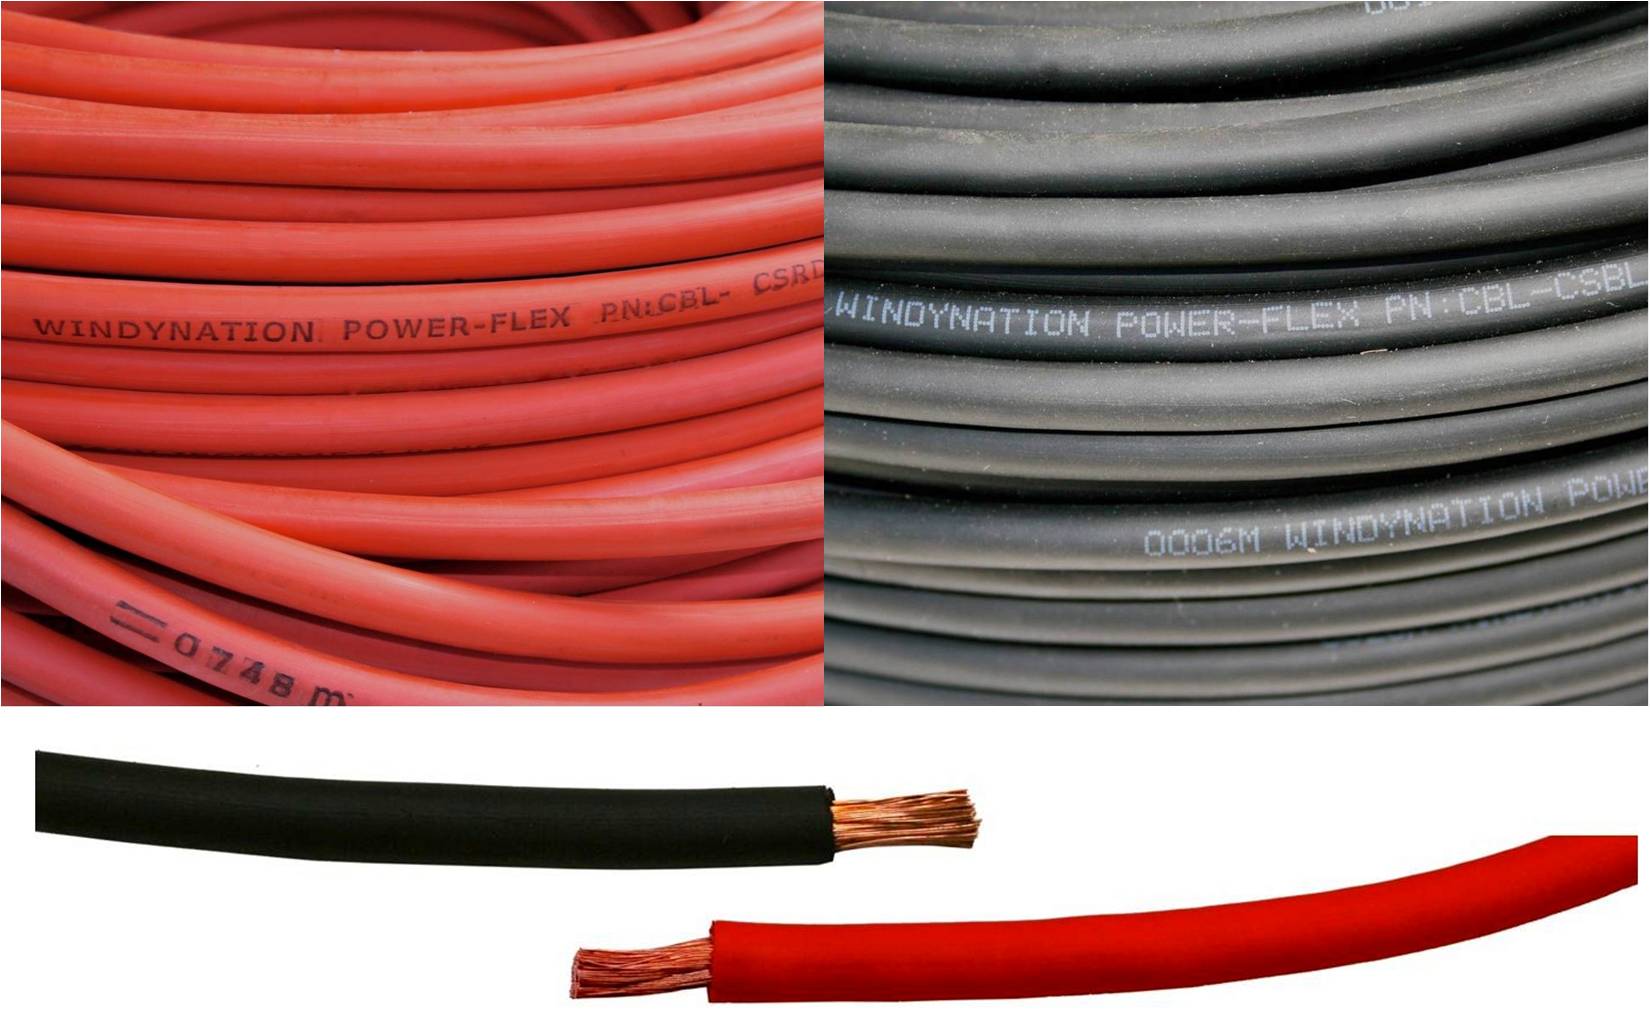 How to Source Welding Cable For Sale Online